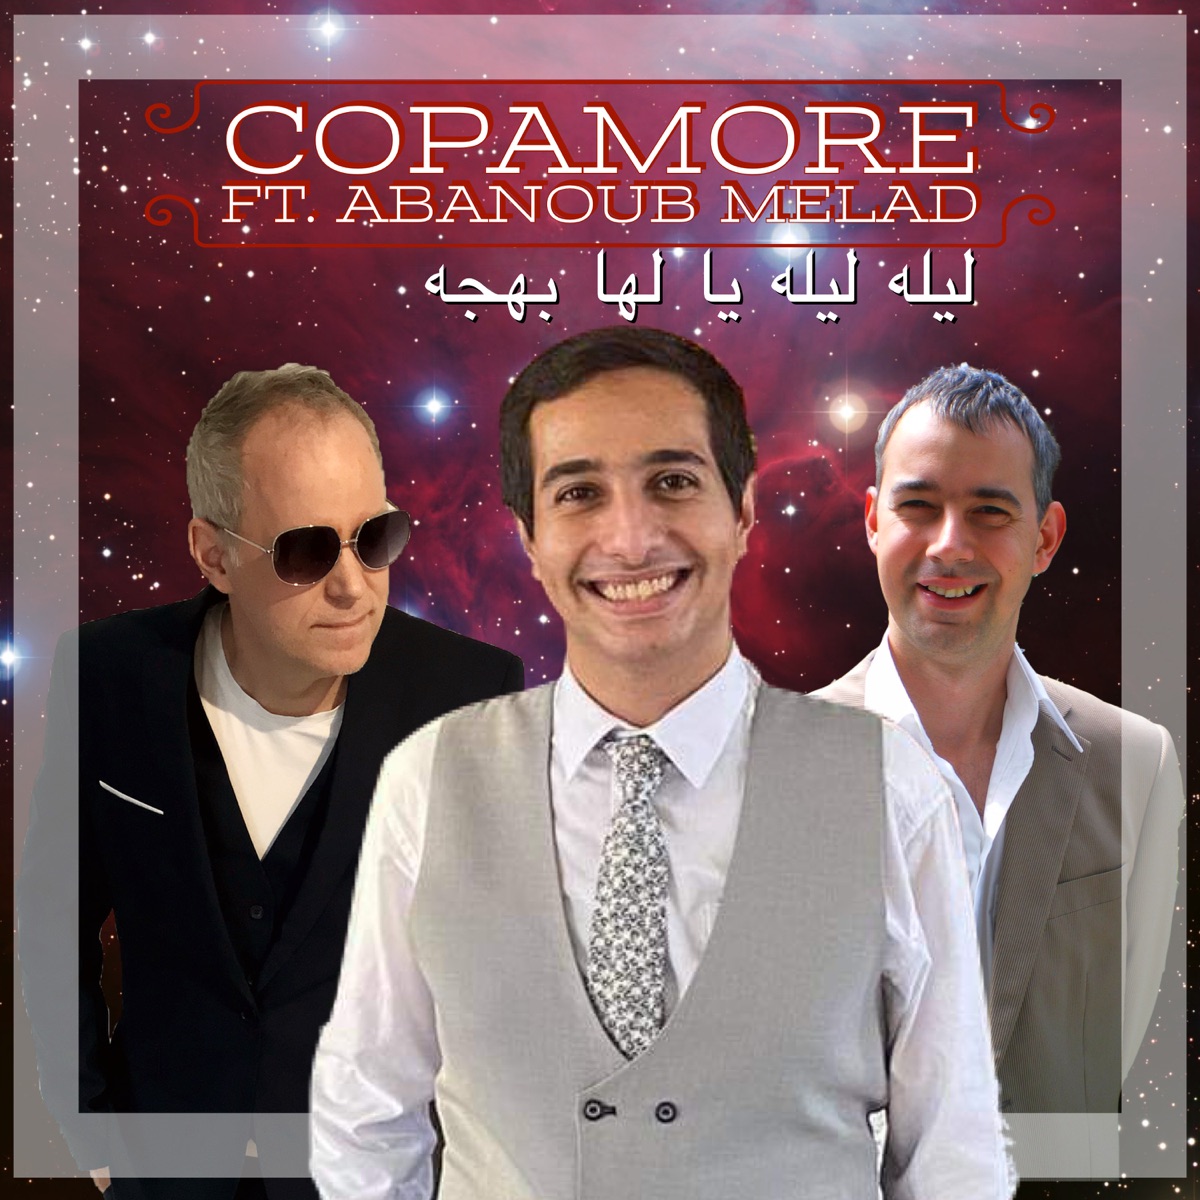 Chico Divertido (Radio Mix) by Copamore on  Music 